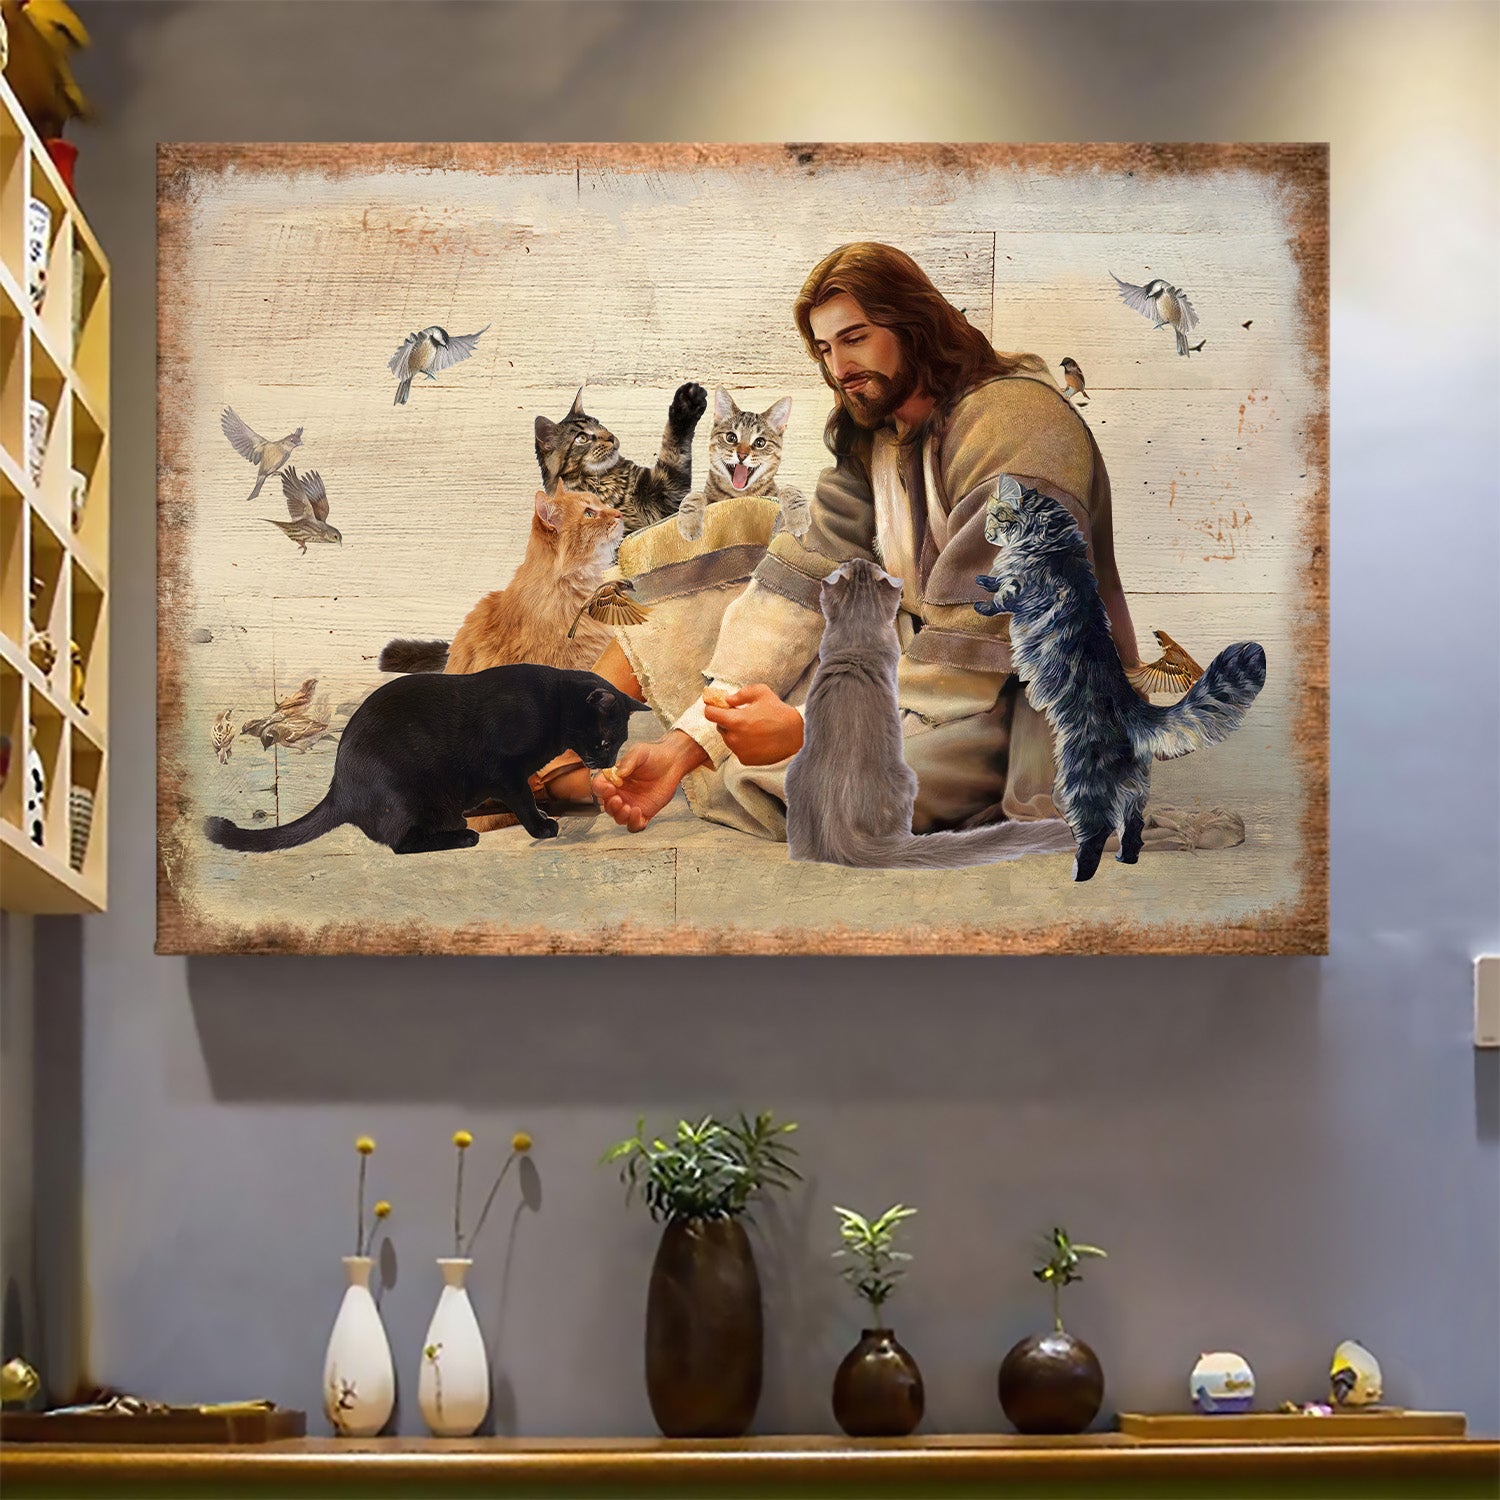 Jesus painting, Playing with cats - Jesus Landscape Canvas Prints, Wall Art